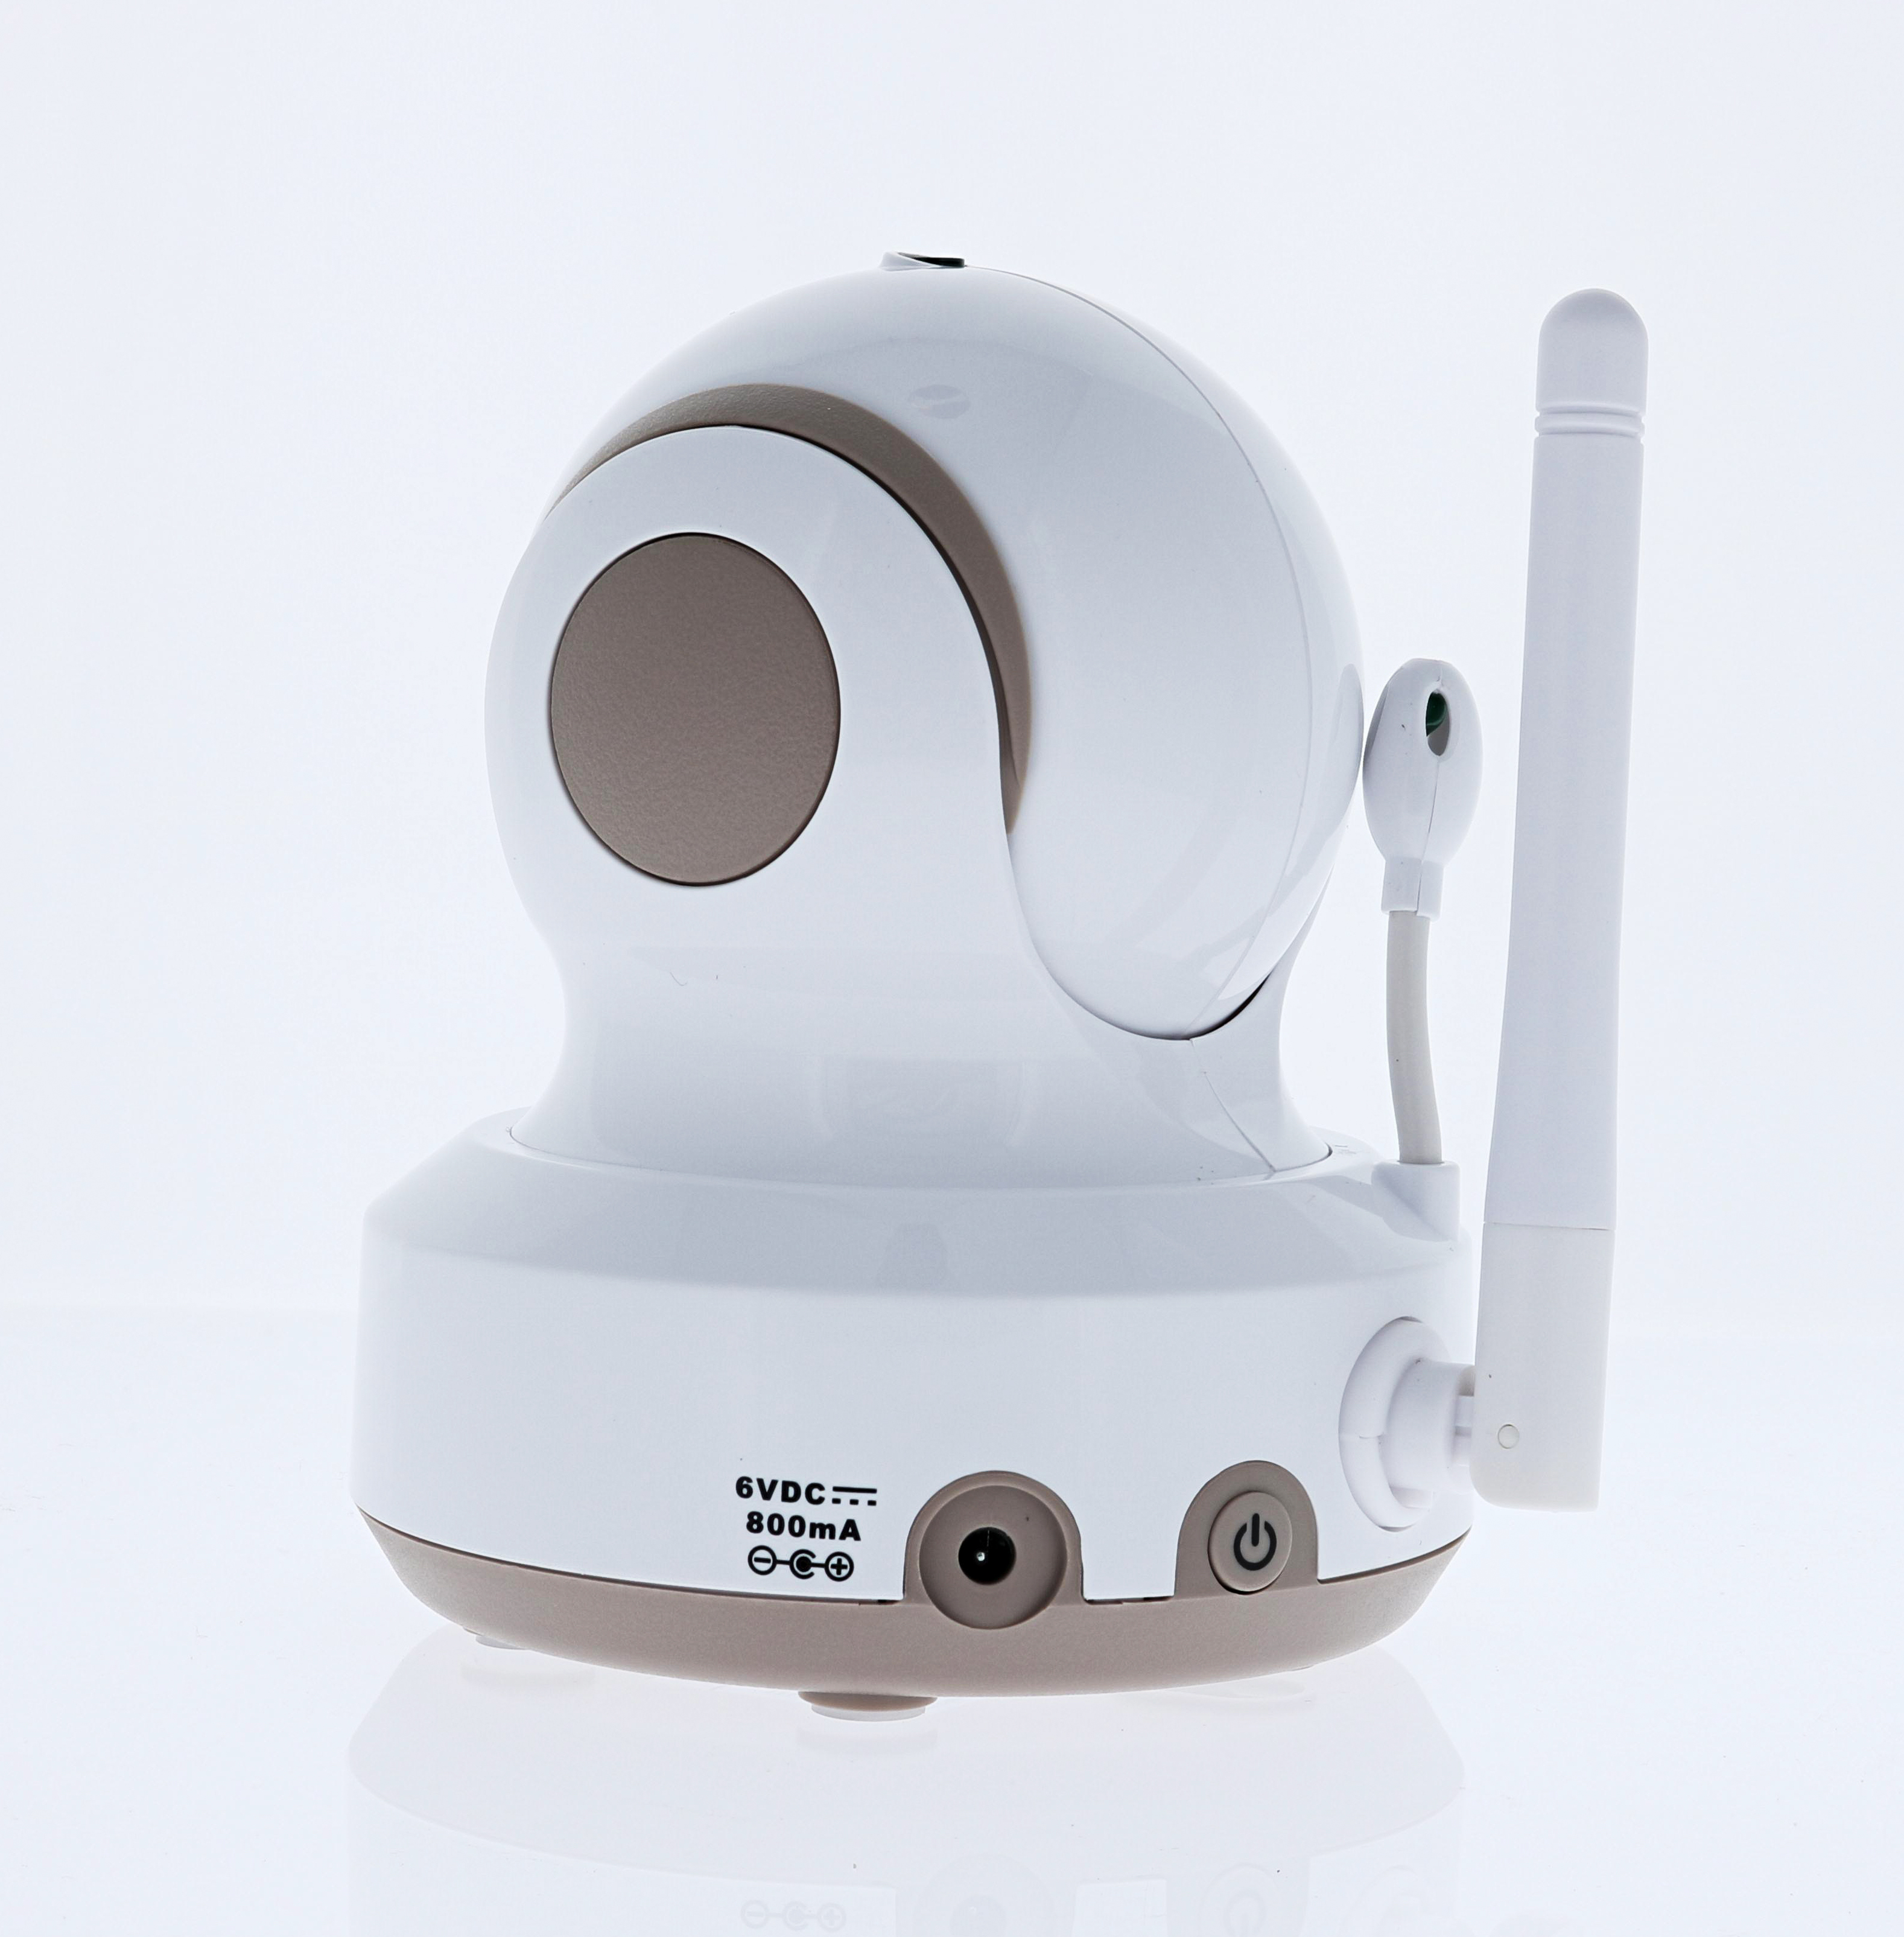 MobiCam DXR-M1 Baby Monitoring System With Smart Auto Tracking, Room Temperature, Lullabies - image 3 of 7